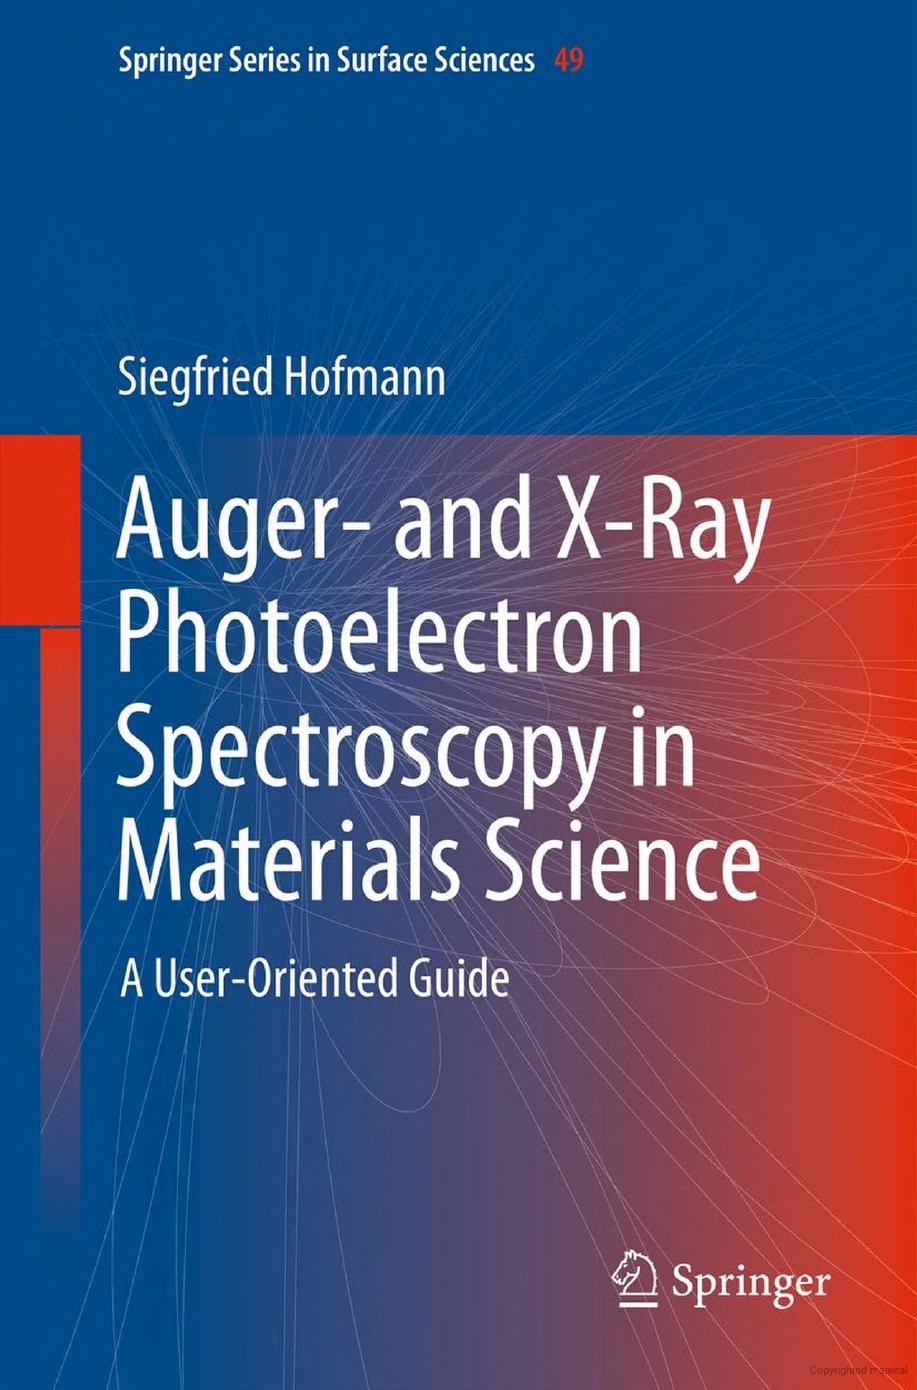 49. Auger- and X-Ray Photoelectron Spectroscopy in Materials Science by A User-Oriented Guide (2013)